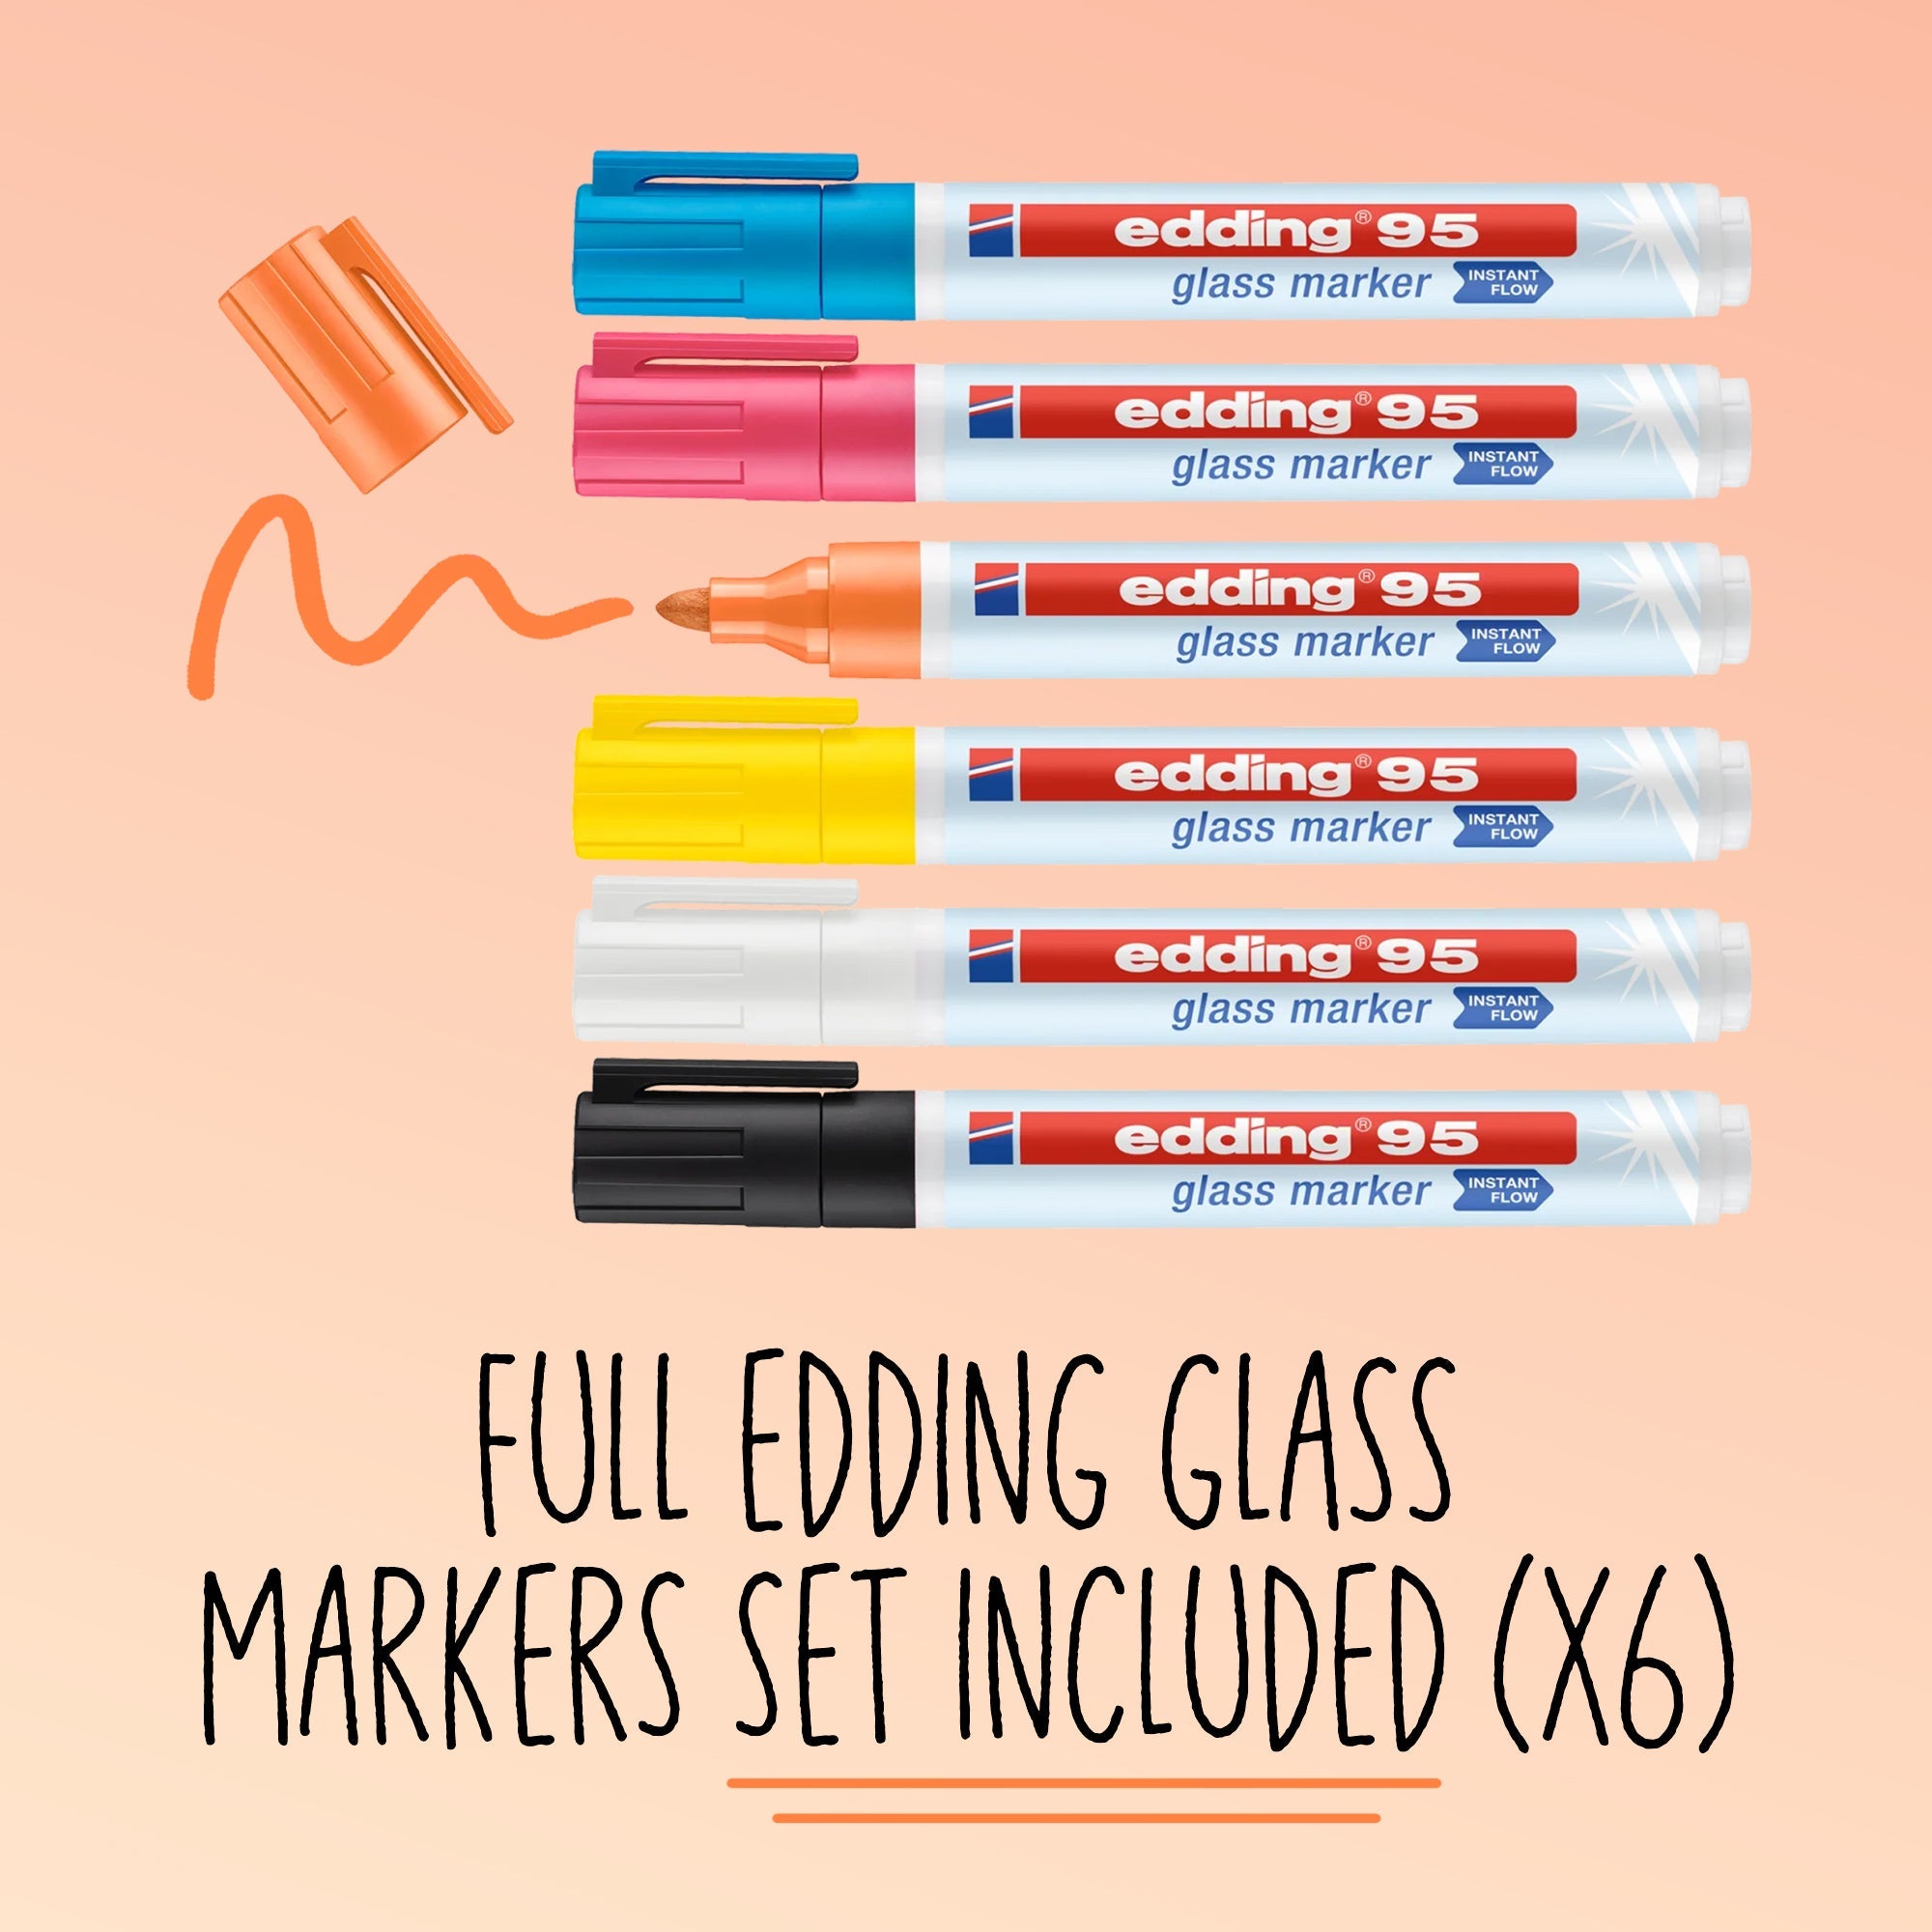 Custom Office/Workspace Creative Glass Board - 6x Edding Markers Set Included